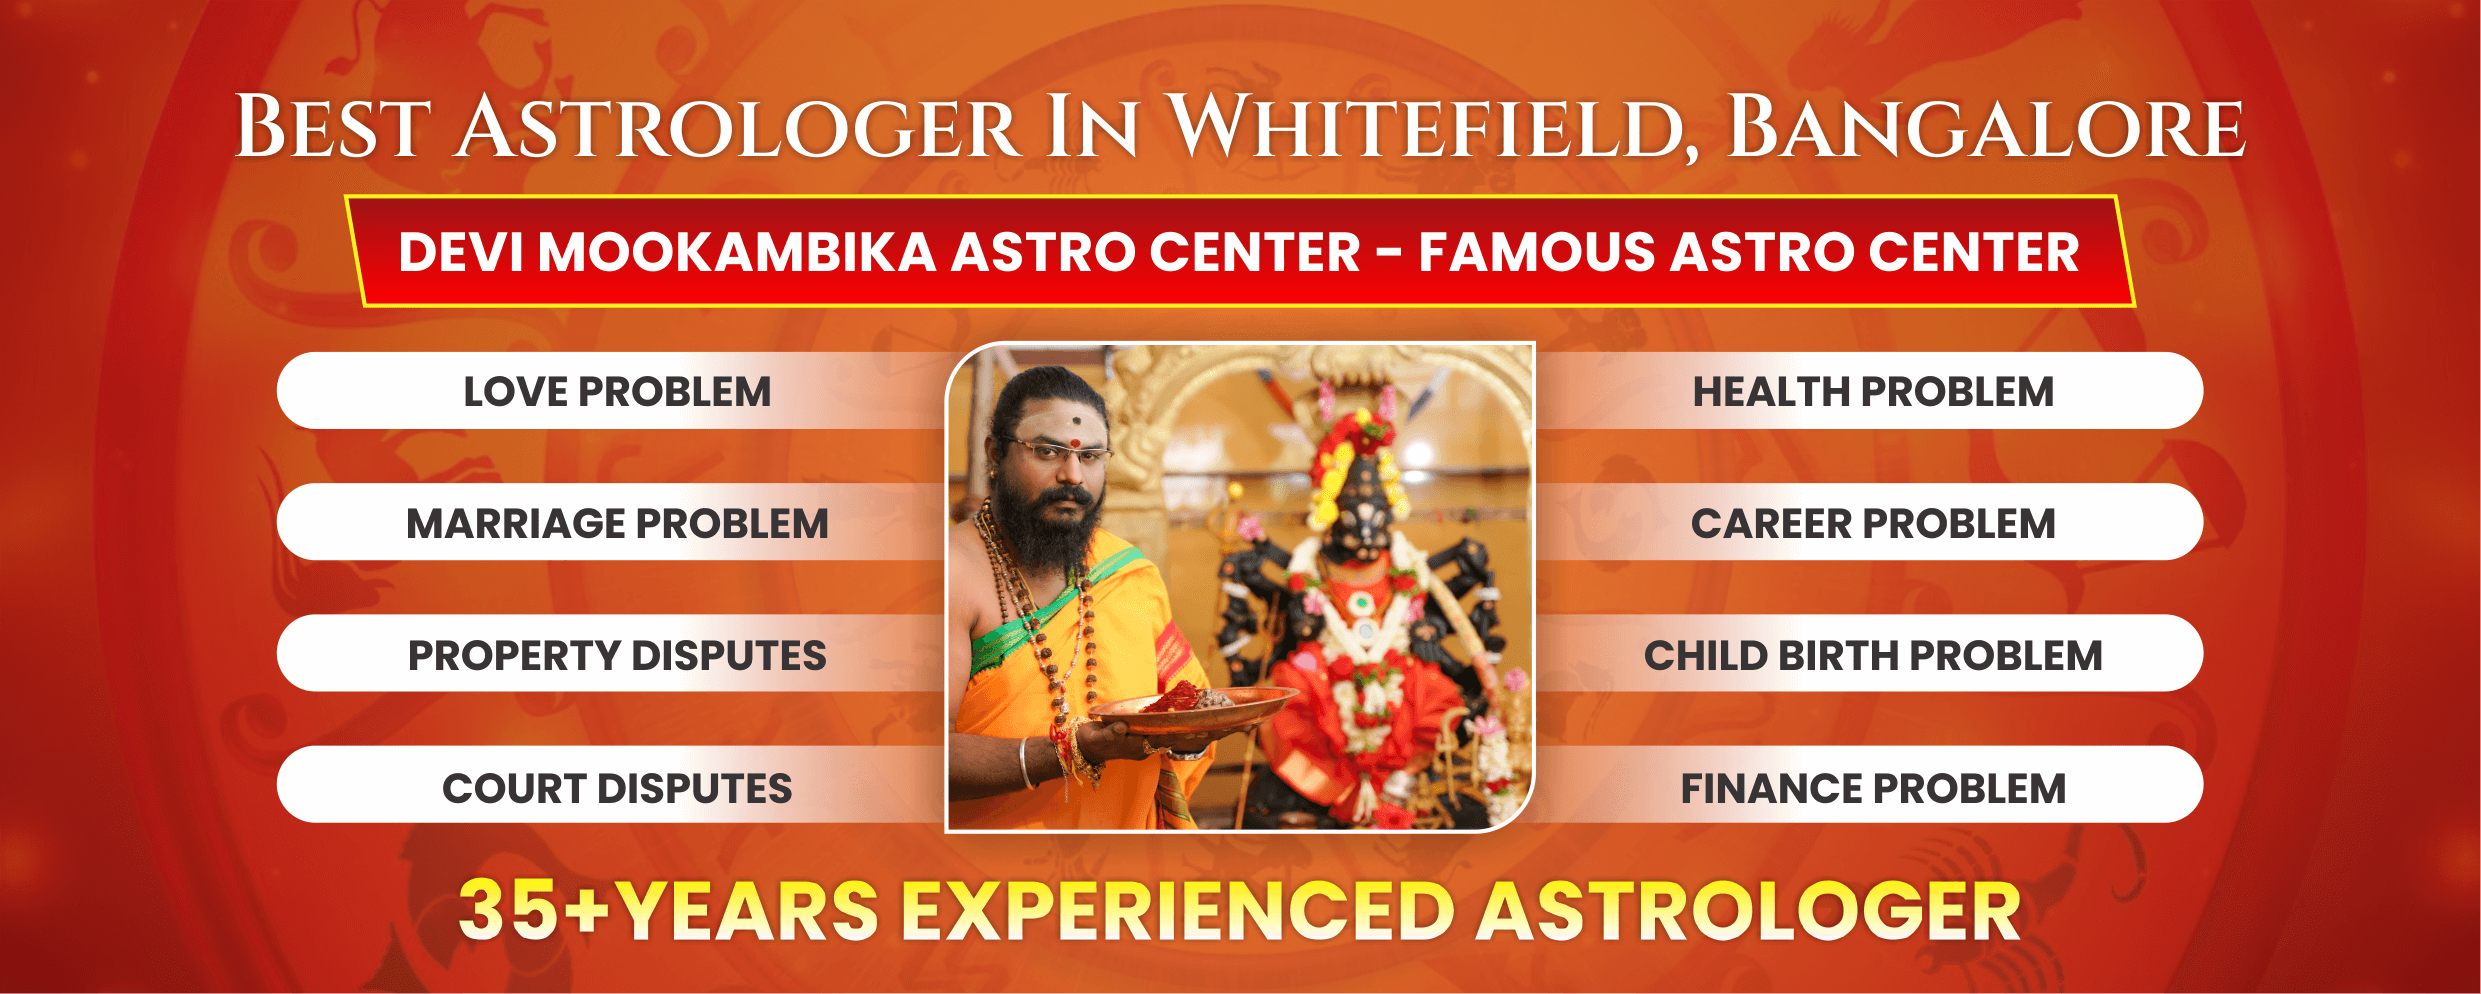 Best Astrologer in Whitefield Bangalore